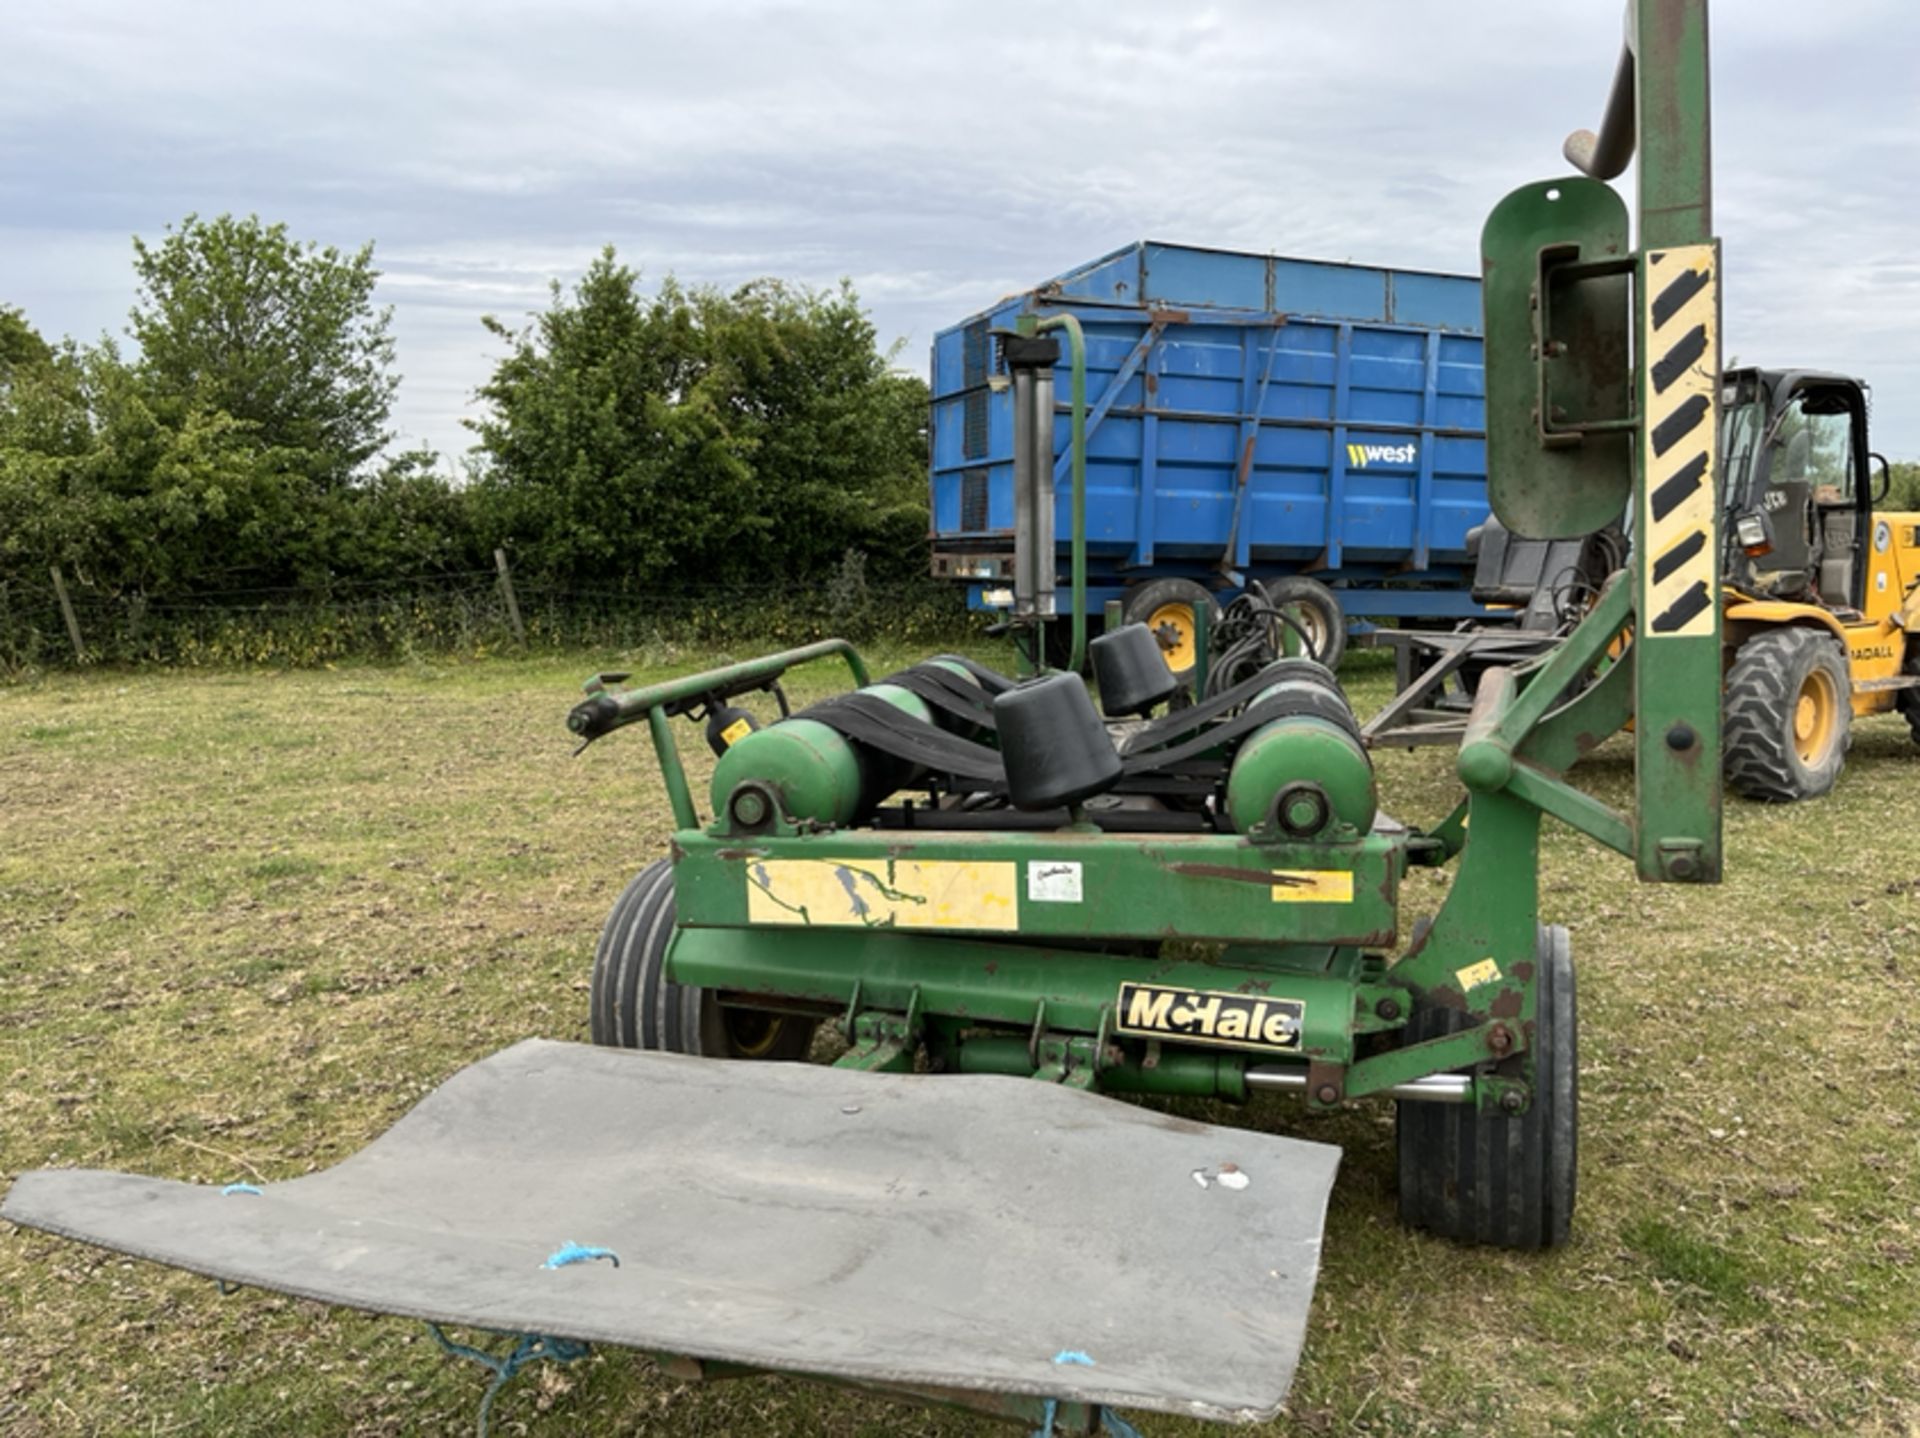 MCHALE 991b 750ml SELF LOAD BALE WRAPPER - C/W MANUAL CONTROLS AND COUNTER *PLUS VAT* - Image 5 of 5